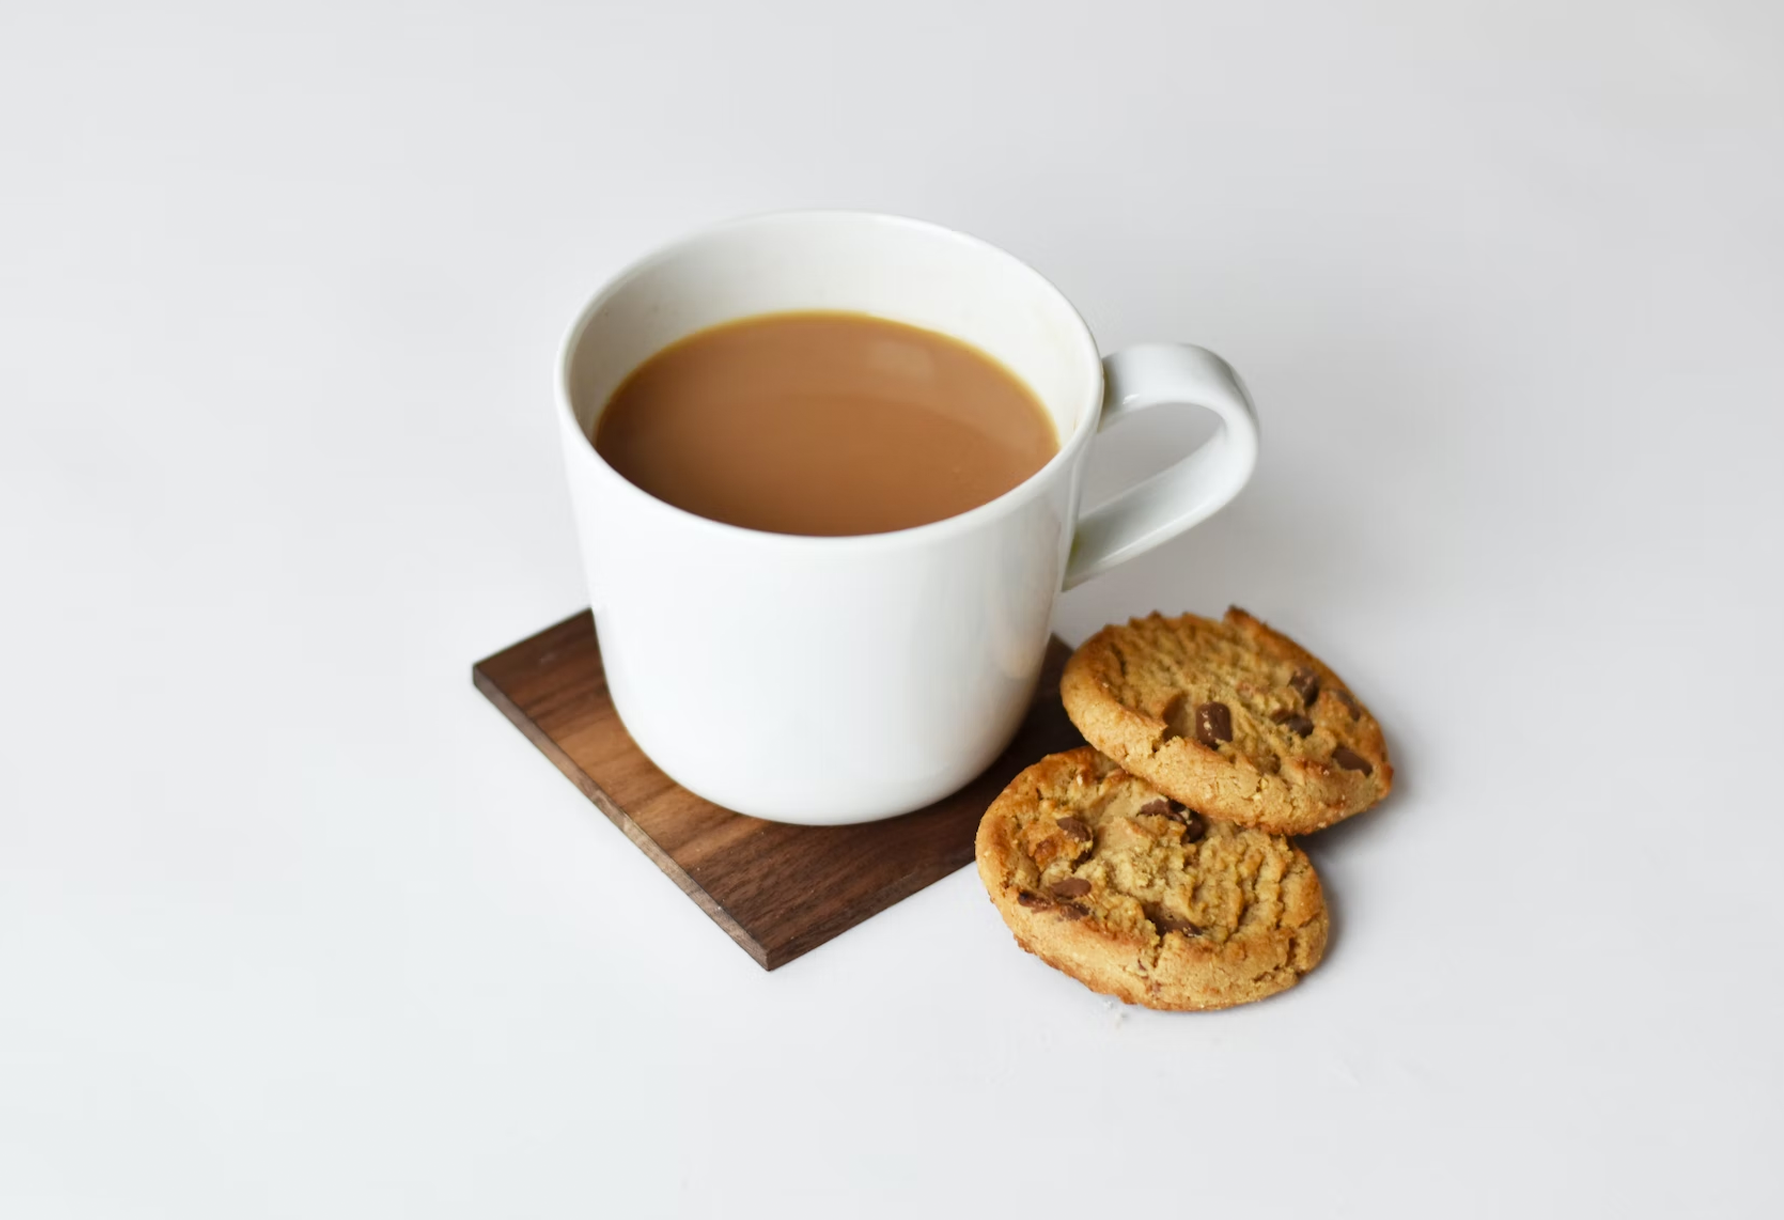 A cup of tea and a chocolate chip biscuit